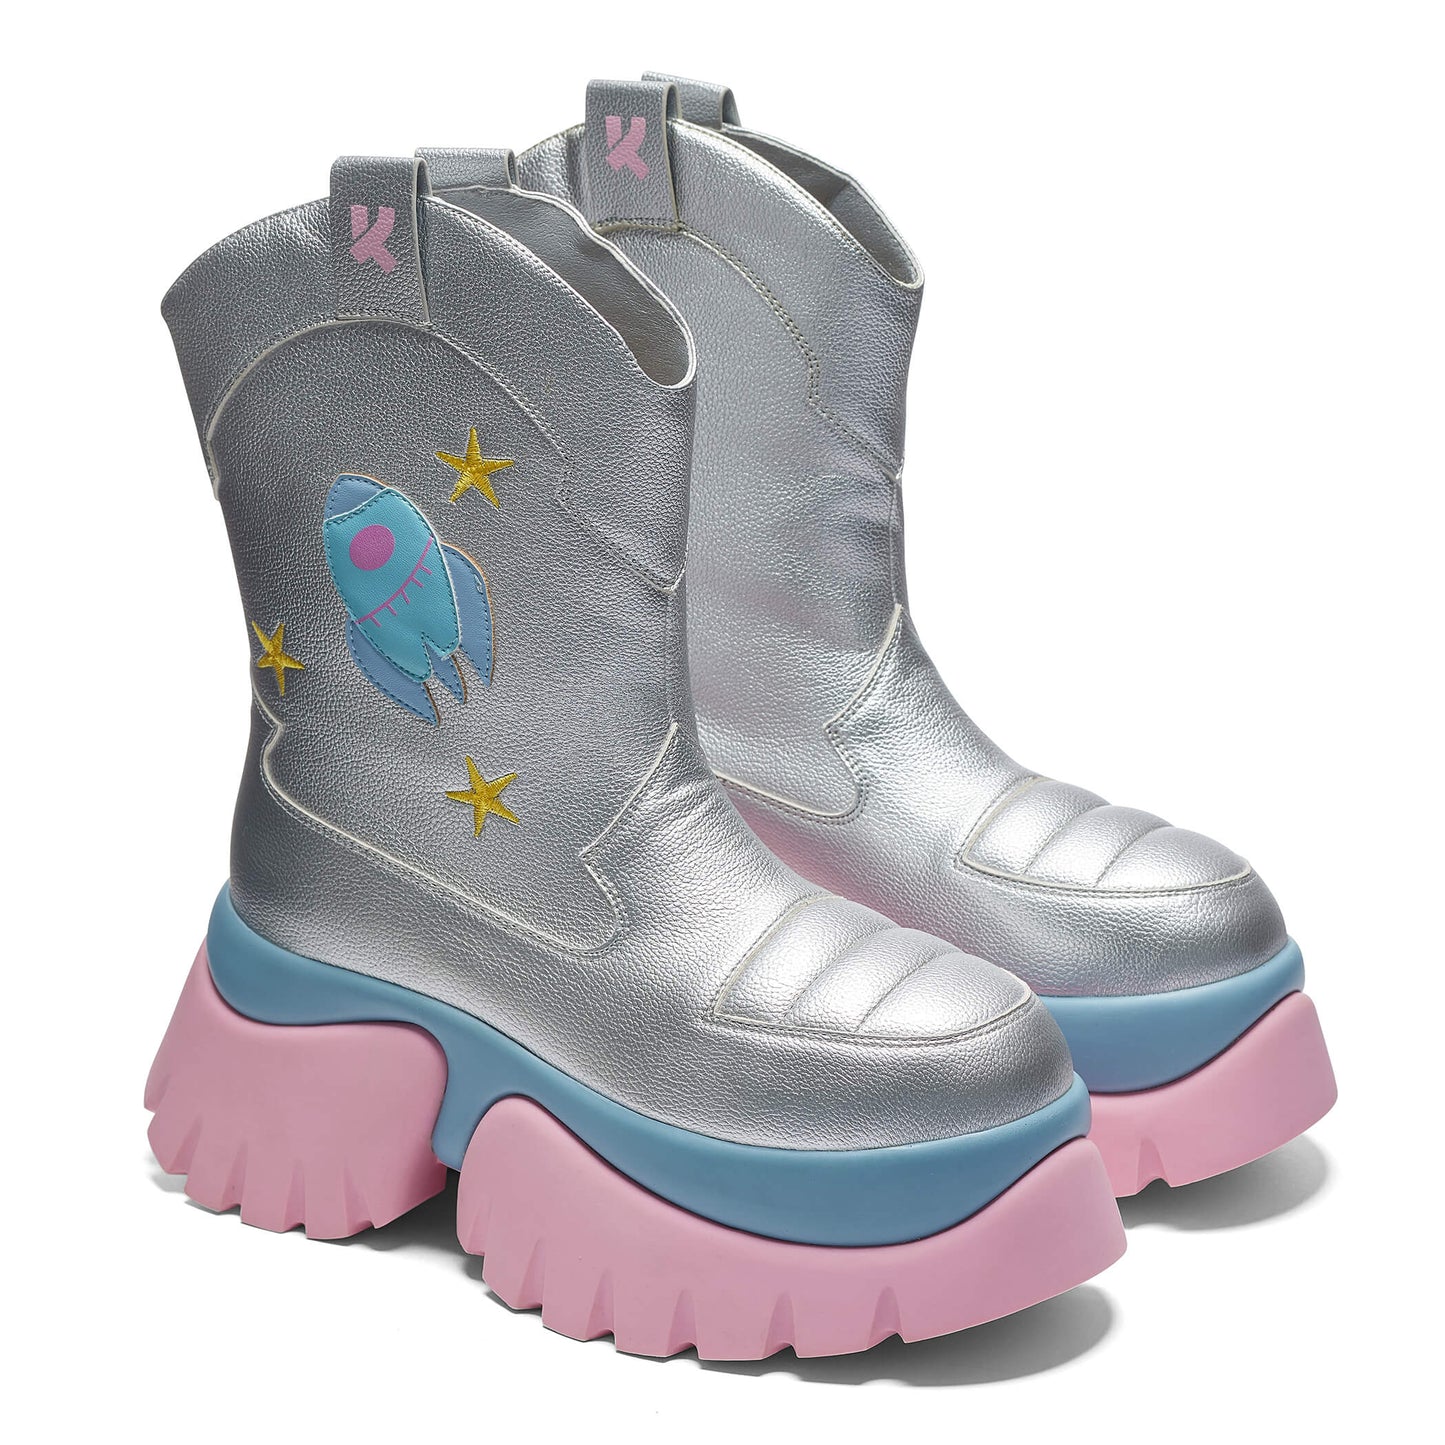 A Fairytale Galaxy Space Boots - Silver - Ankle Boots - KOI Footwear - Silver - Three-Quarter View